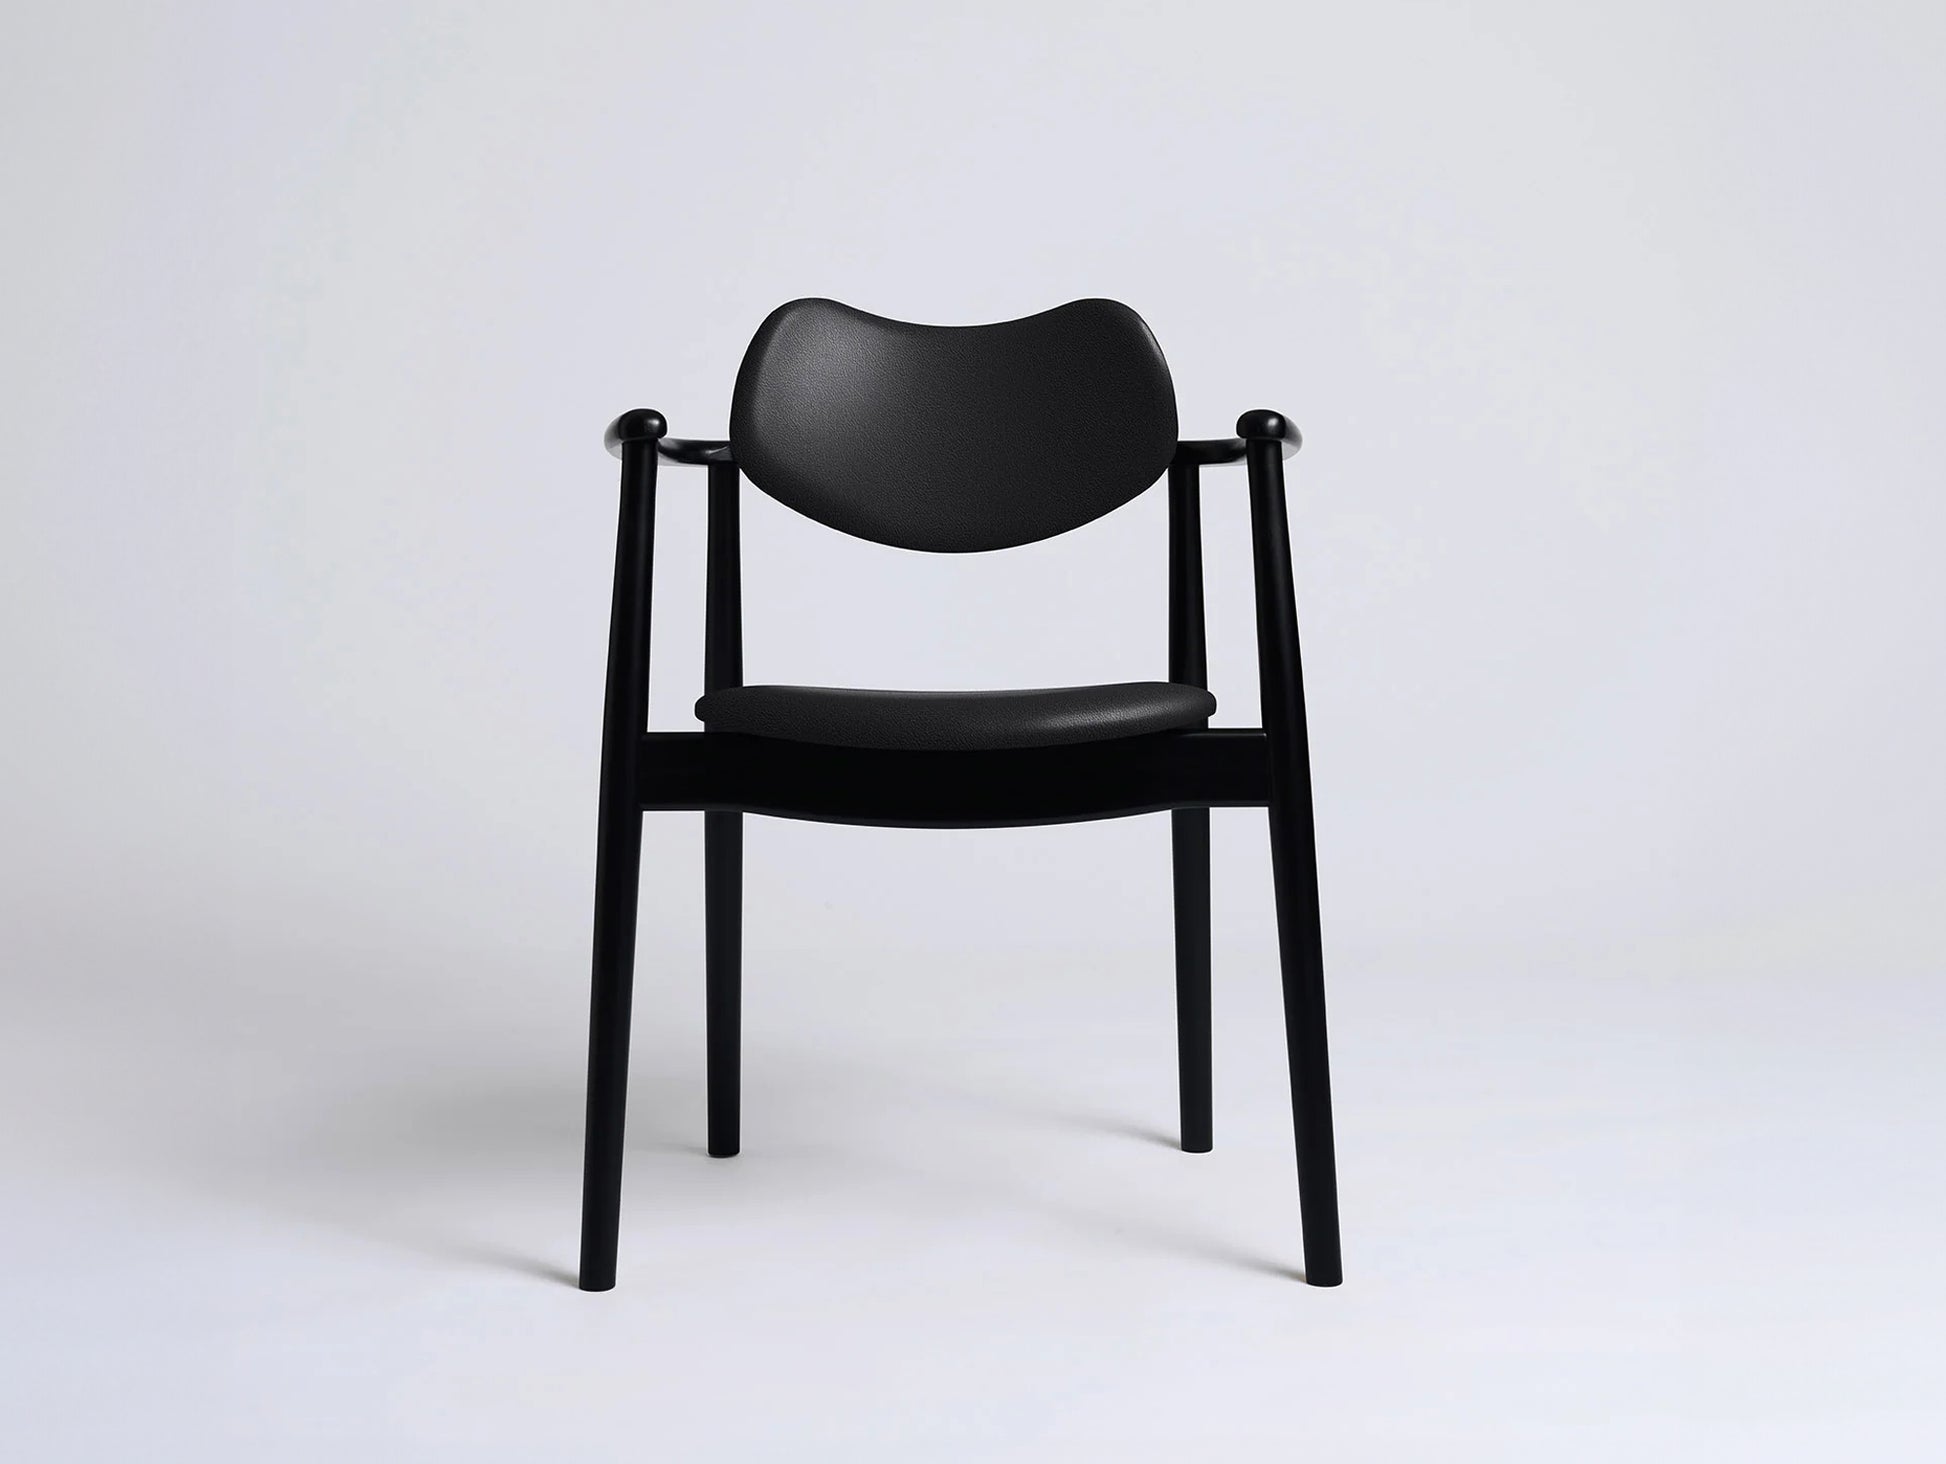 Regatta Chair Seat and Back Upholstered by Ro Collection - Black Lacquered Beech / Exclusive Rio Black Leather